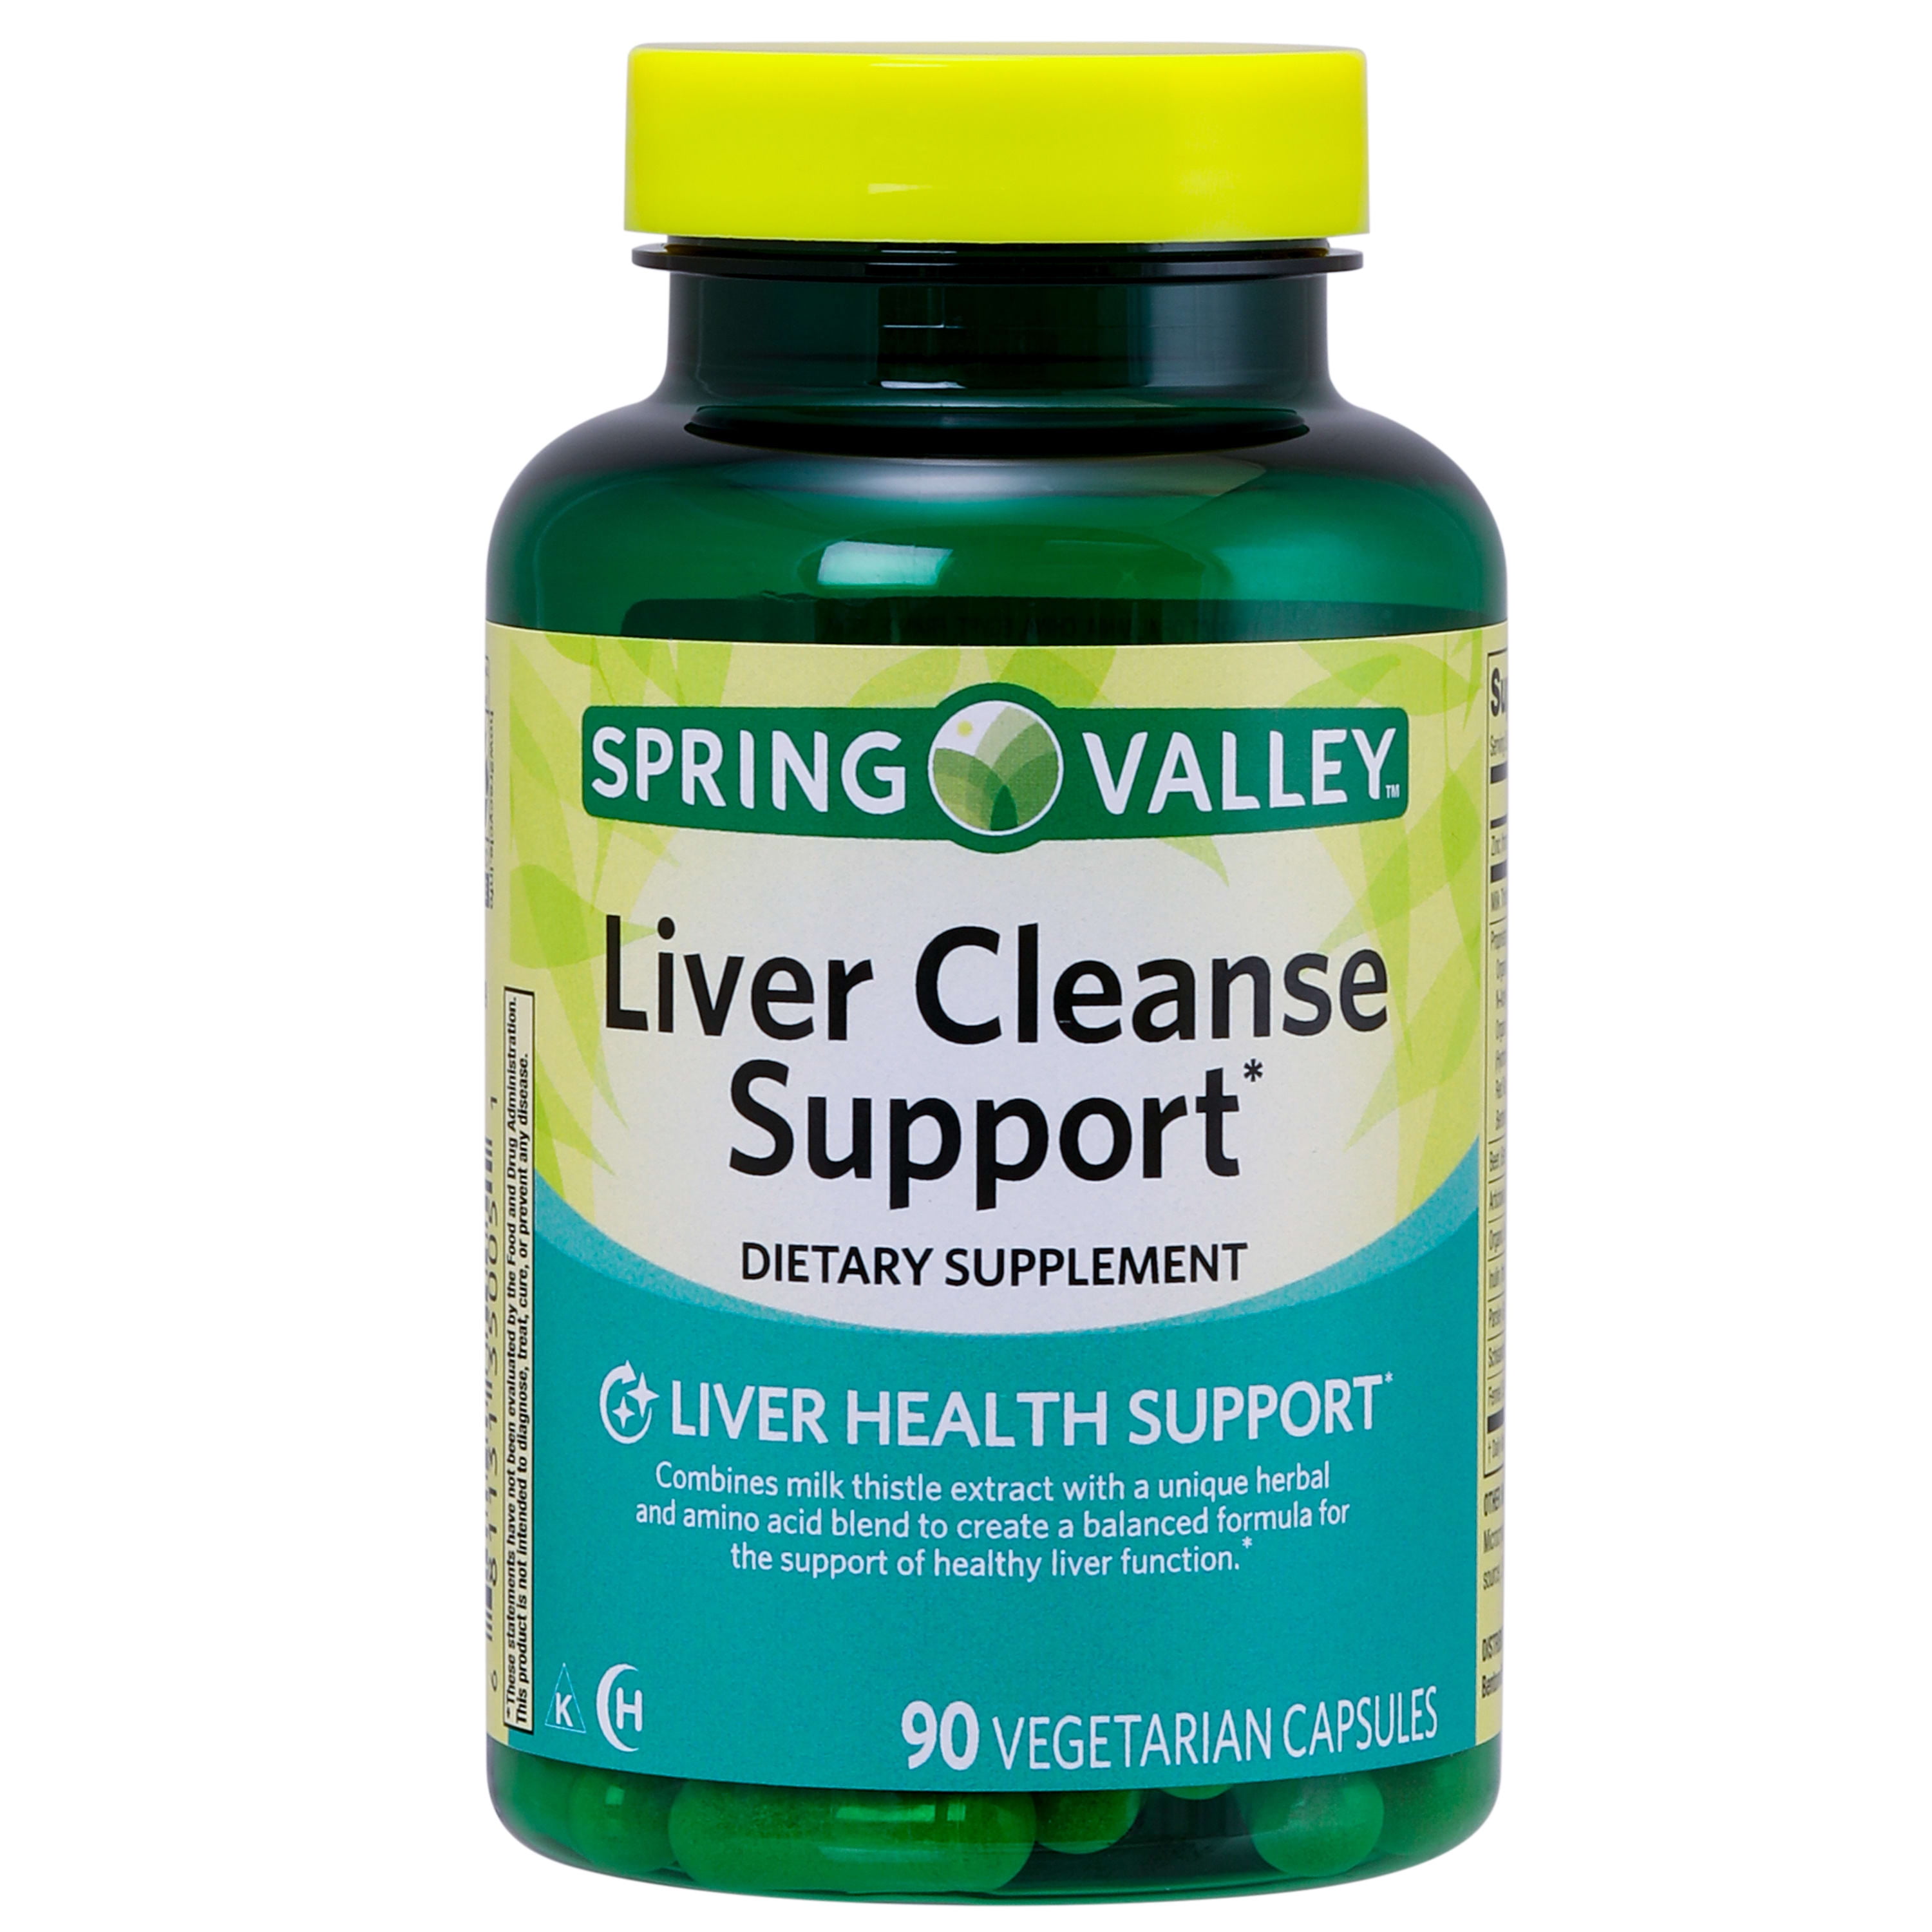 Spring Valley™ Liver Cleanse Support* 90 Vegetarian Capsules